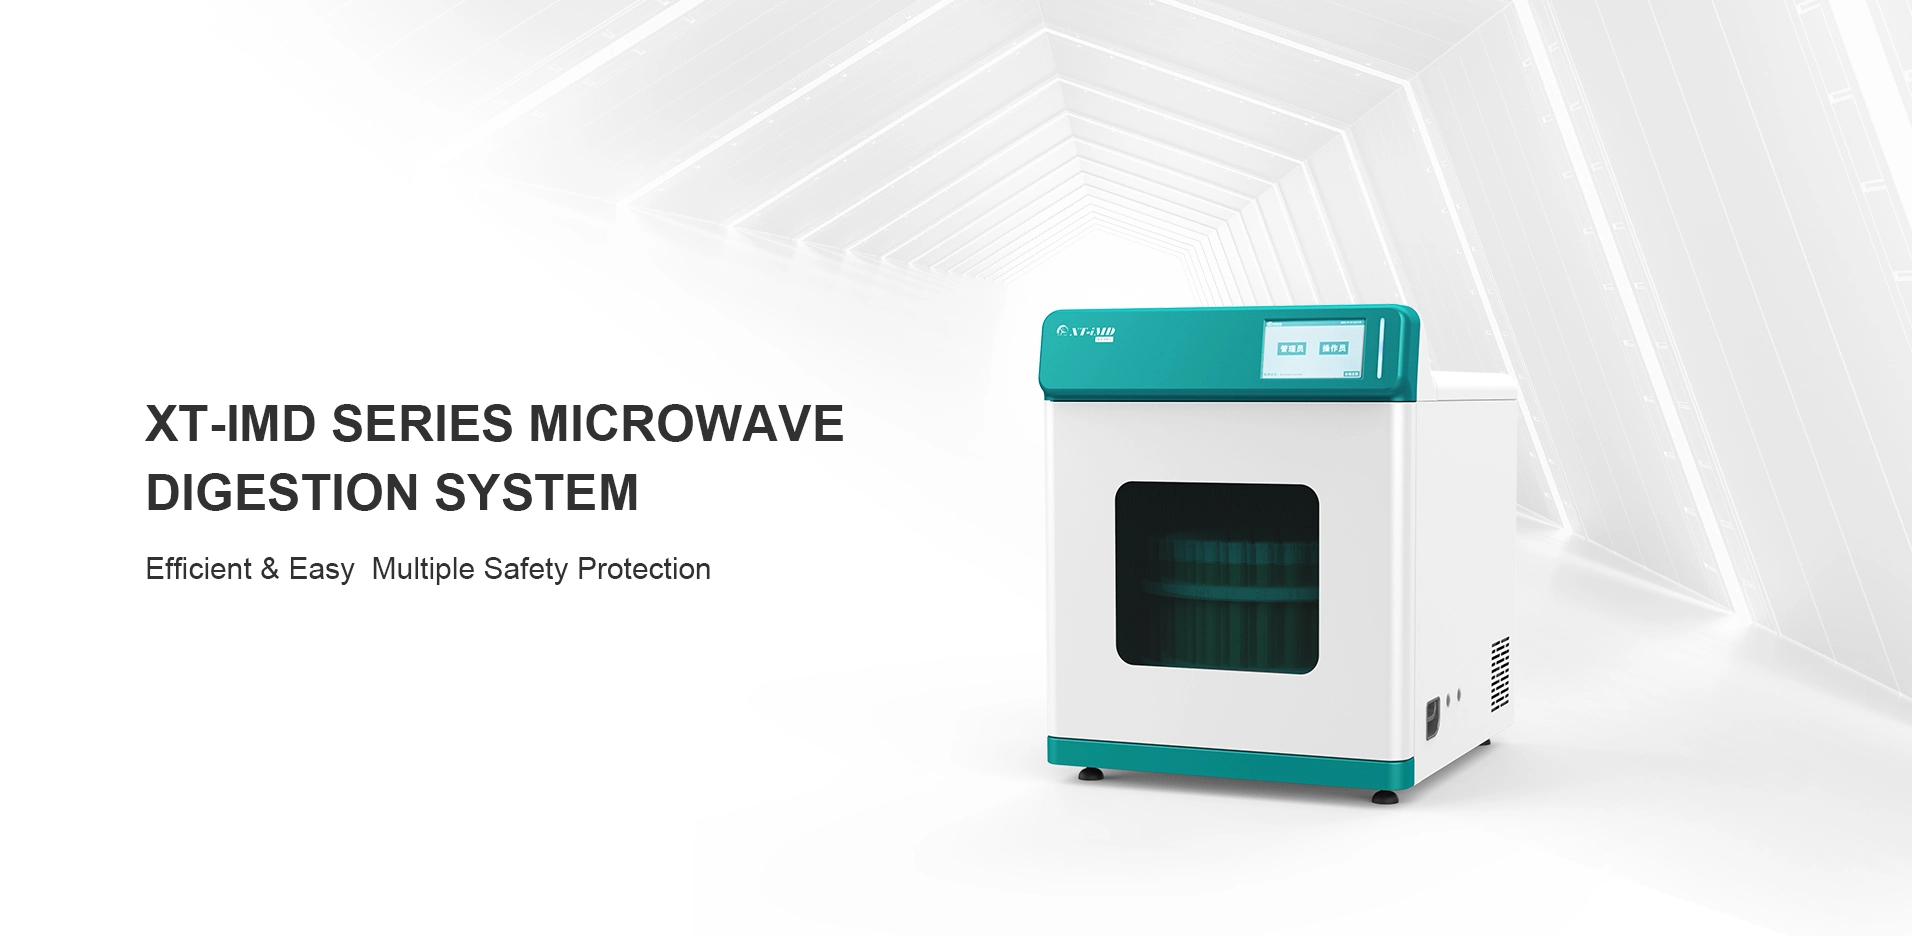 XT-IMD SERIES MICROWAVE DIGESTION SYSTEM